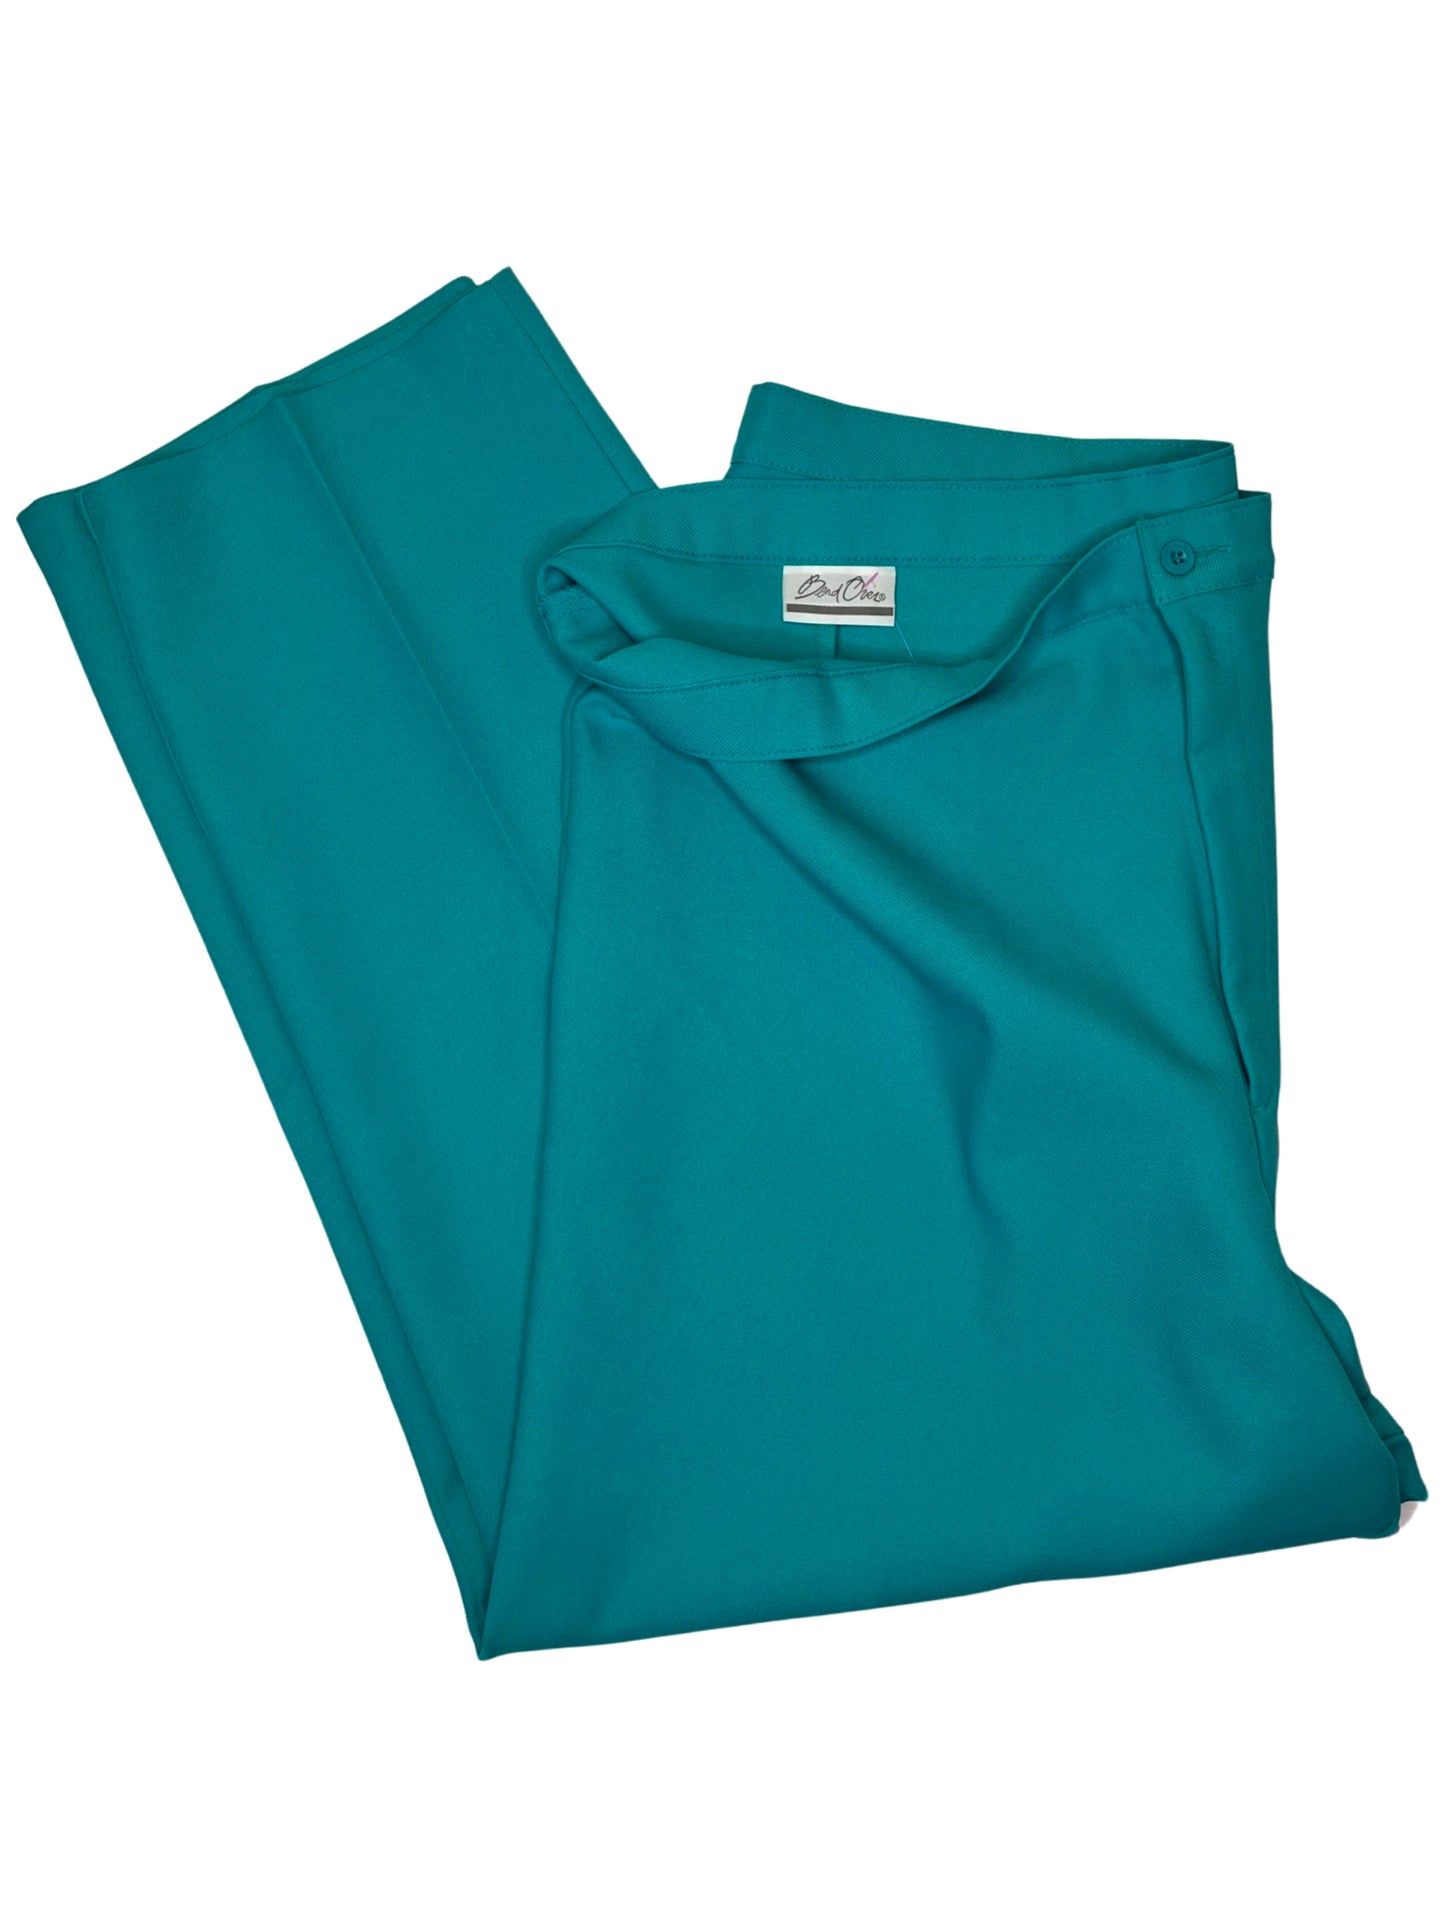 Turquoise Power Pants